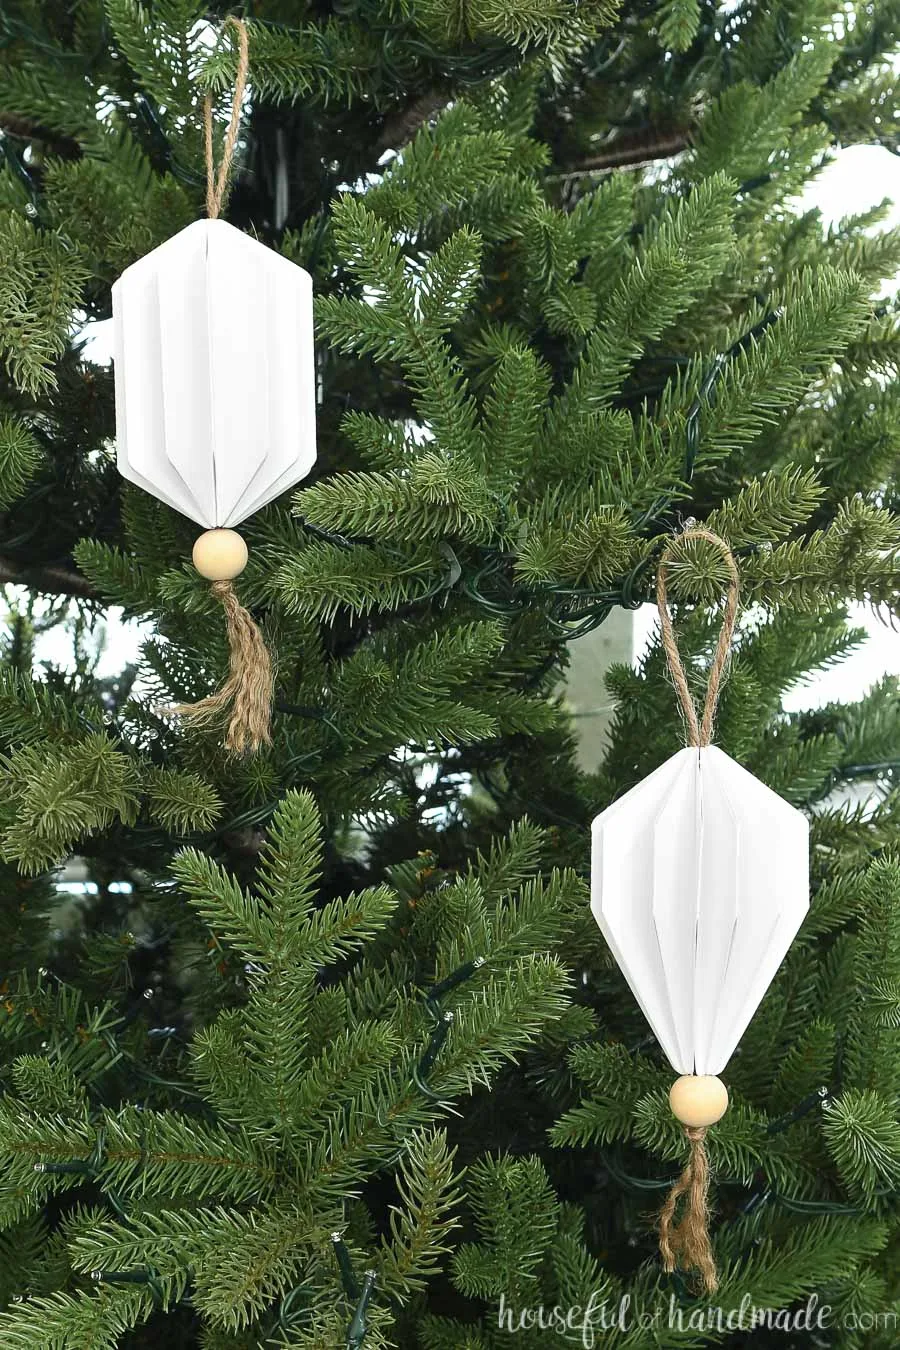 Two jewel shaped Christmas ornaments made from paper hanging on a Christmas tree.